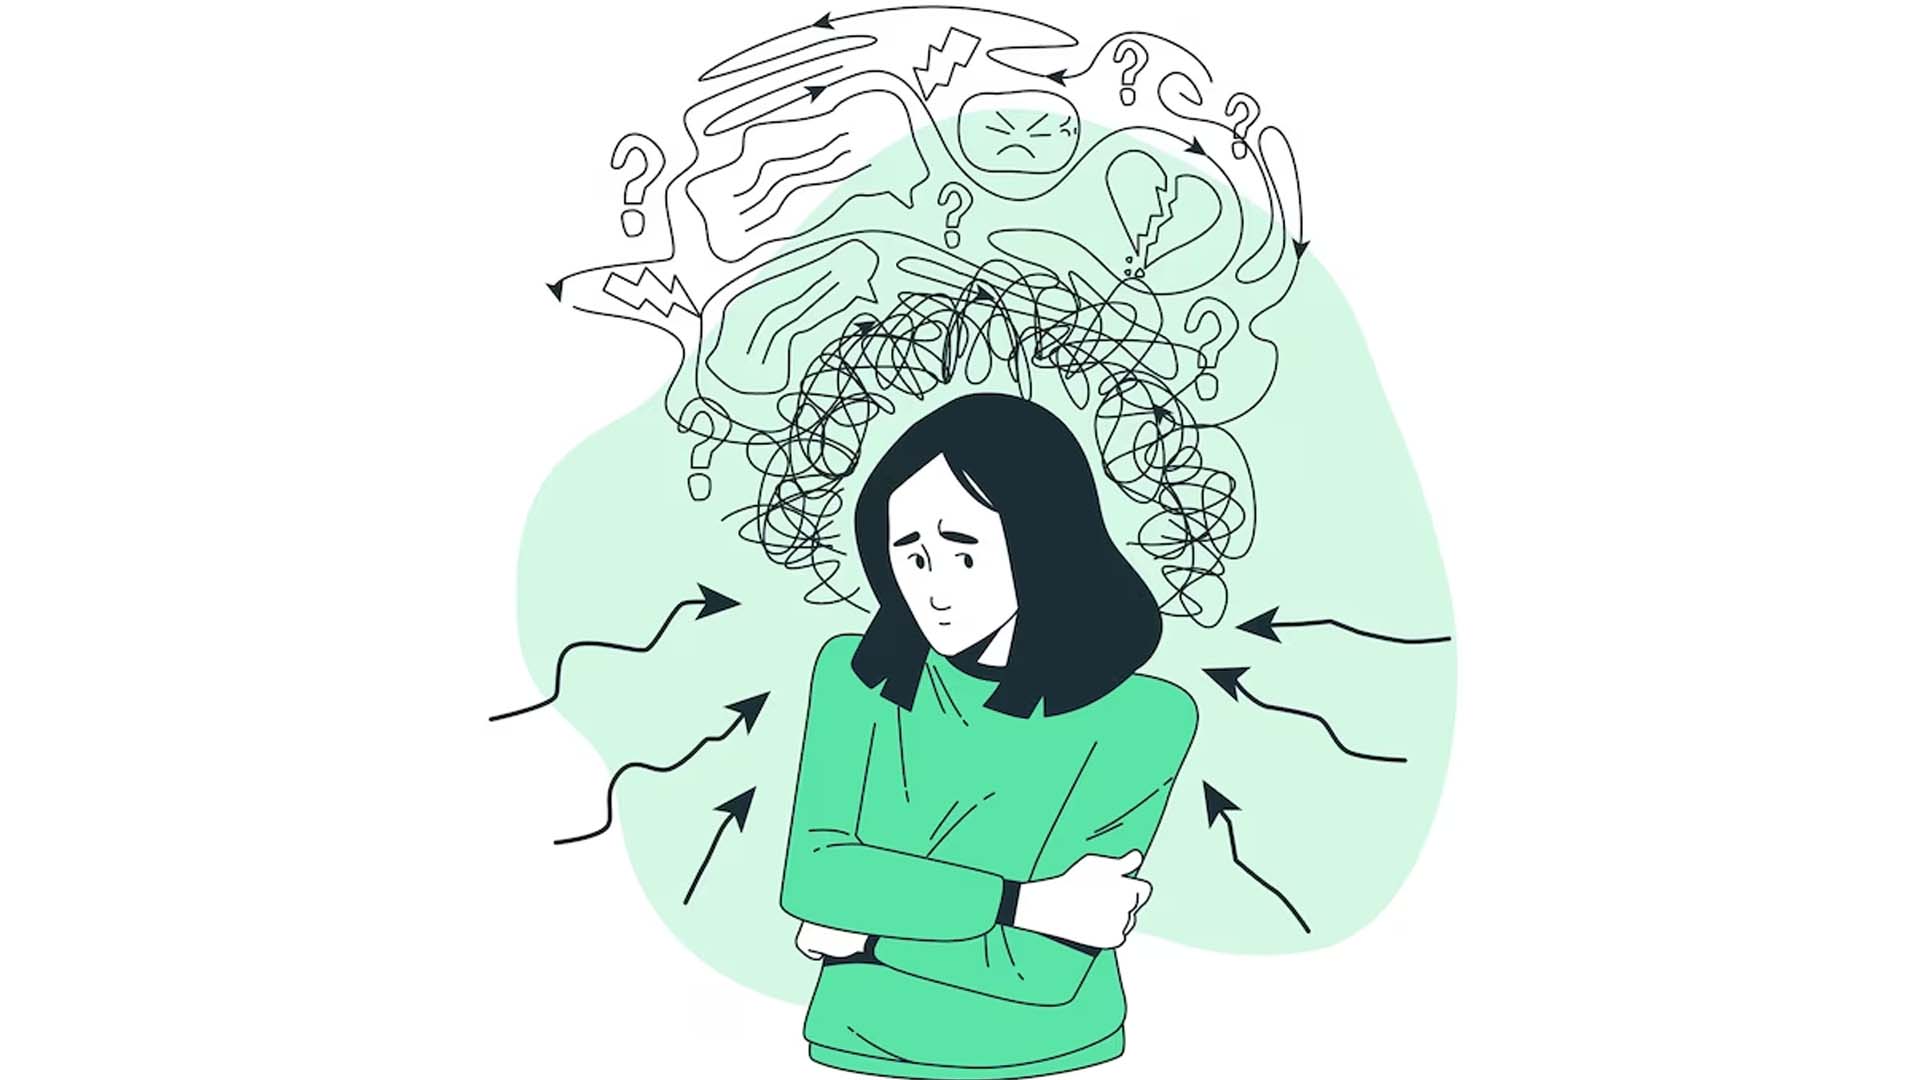 Women Suffering with Anxiety Disorder